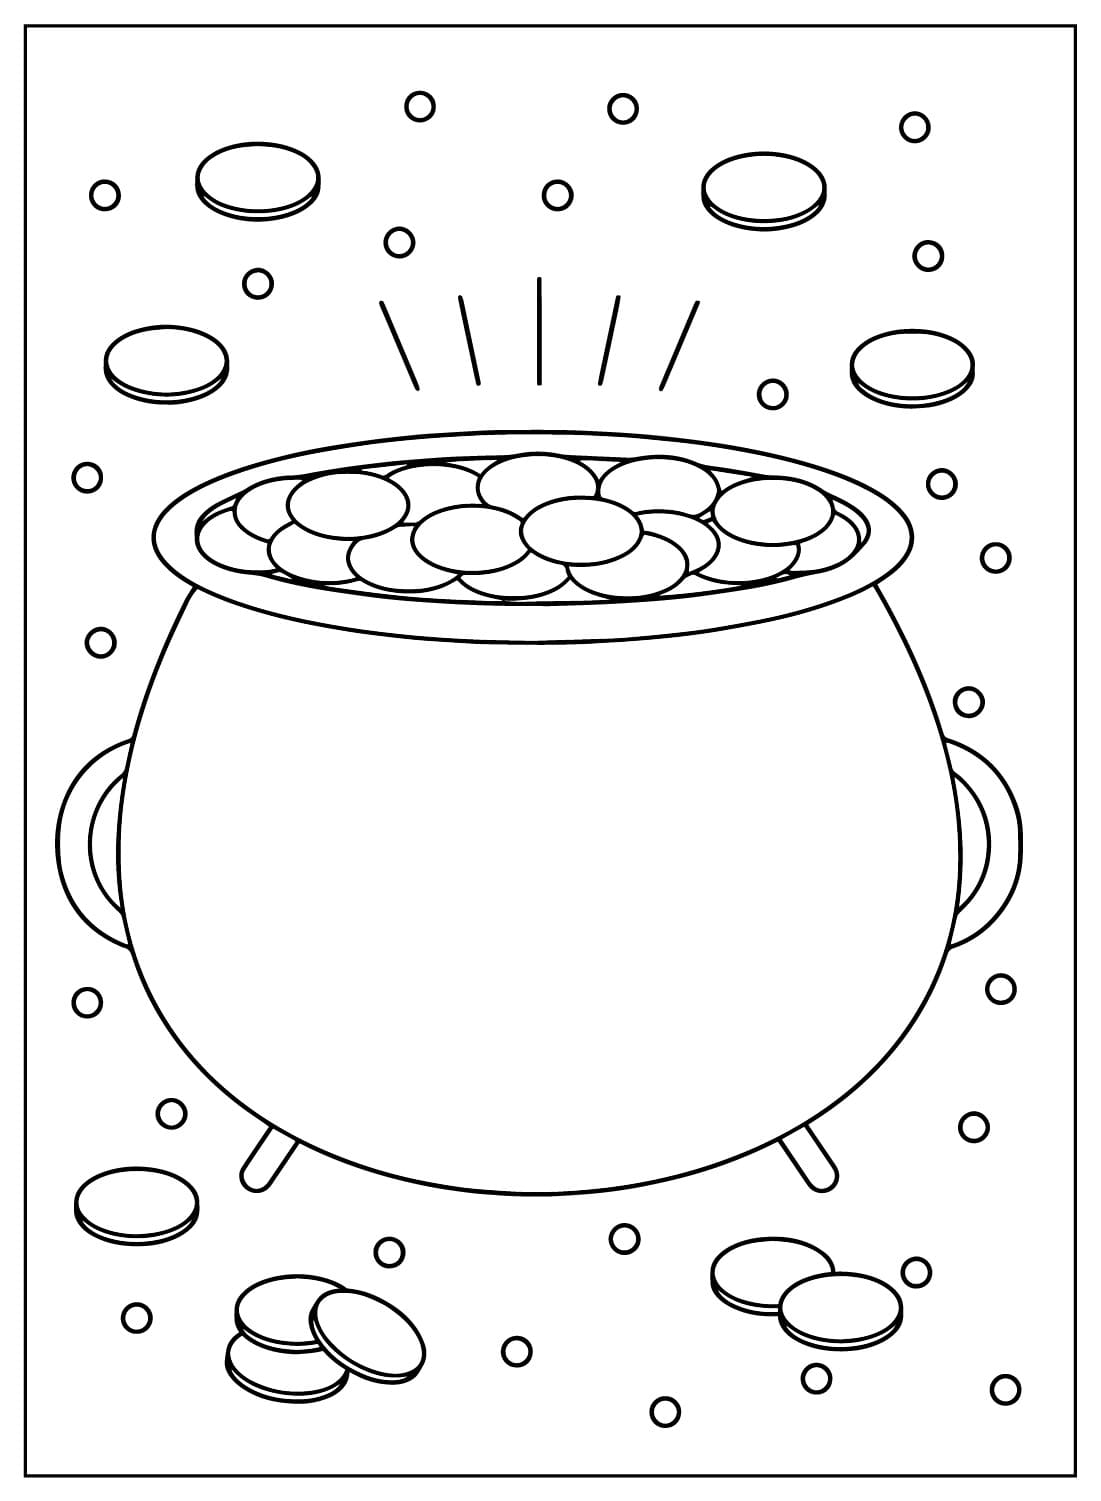 Pot of Gold Coloring Sheet for Kids